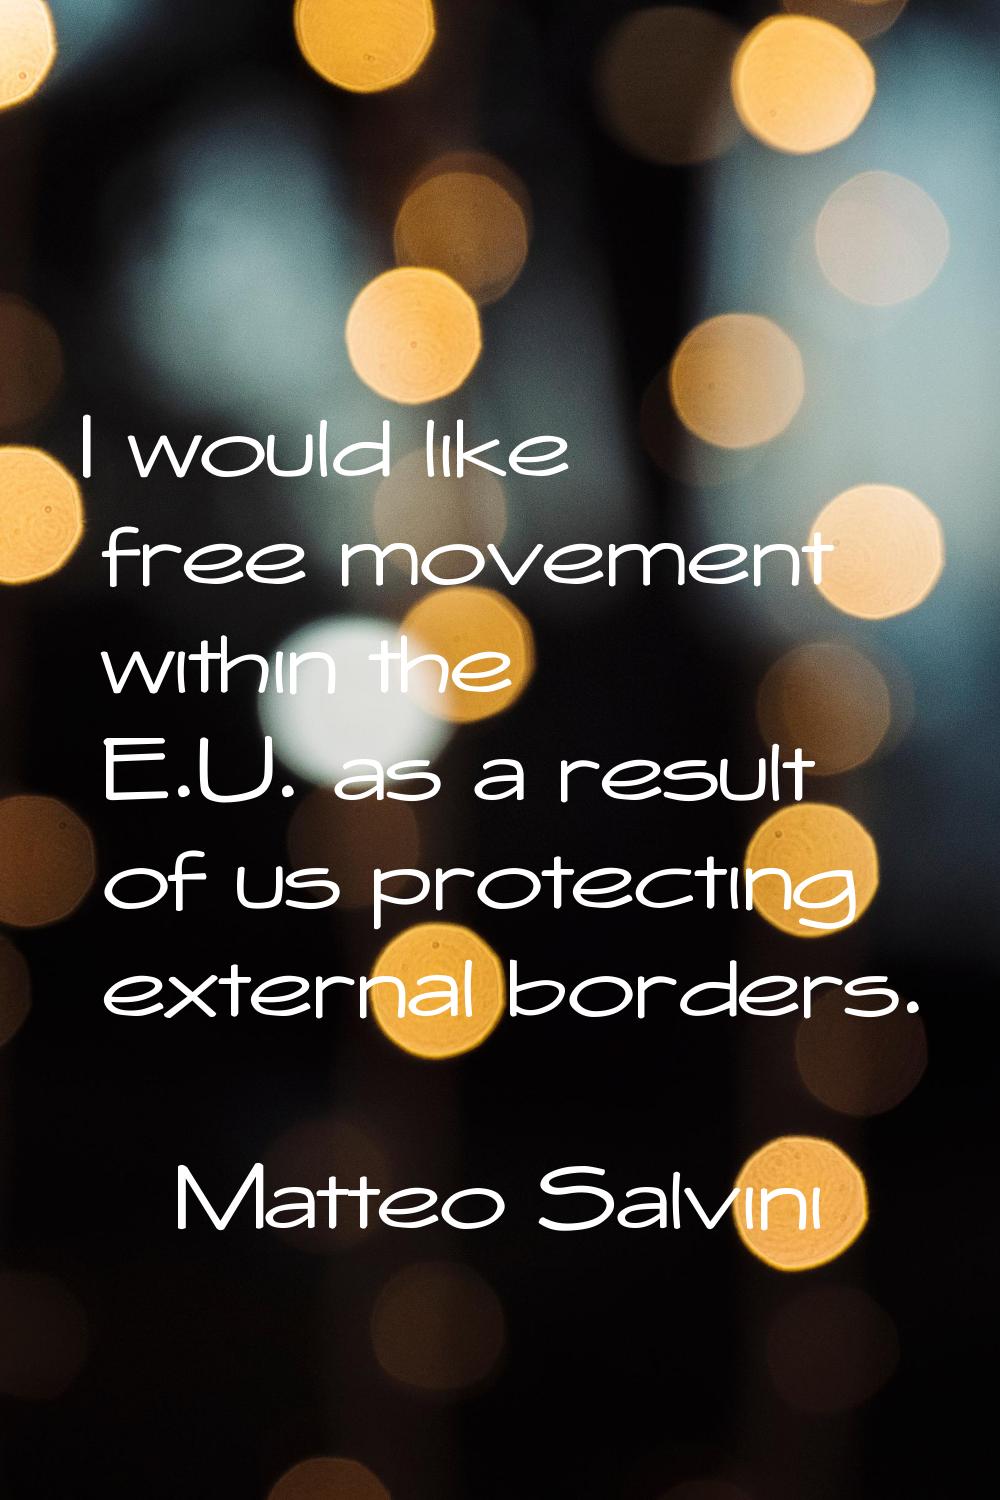 I would like free movement within the E.U. as a result of us protecting external borders.